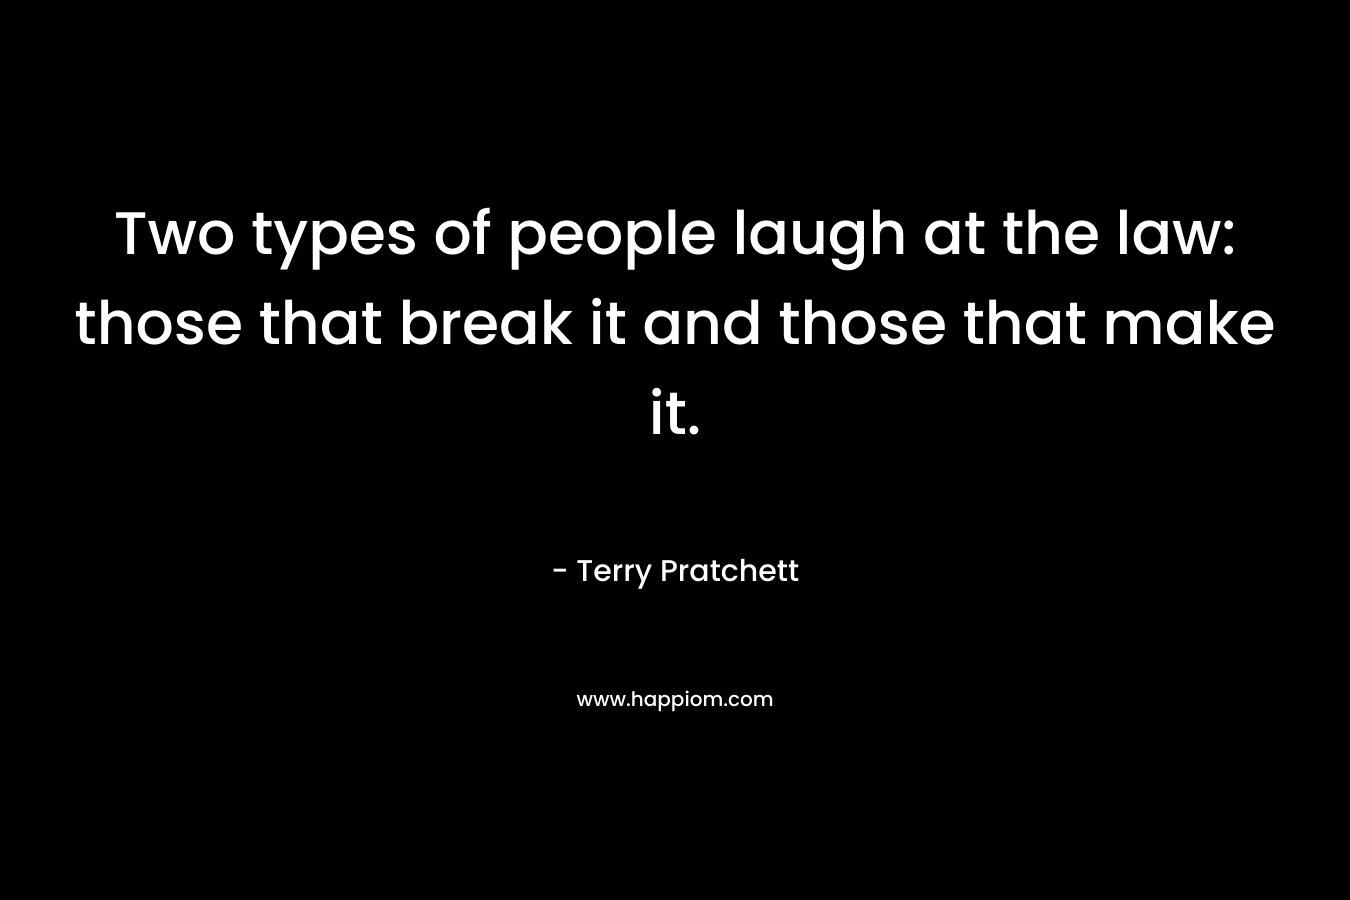 Two types of people laugh at the law: those that break it and those that make it. – Terry Pratchett